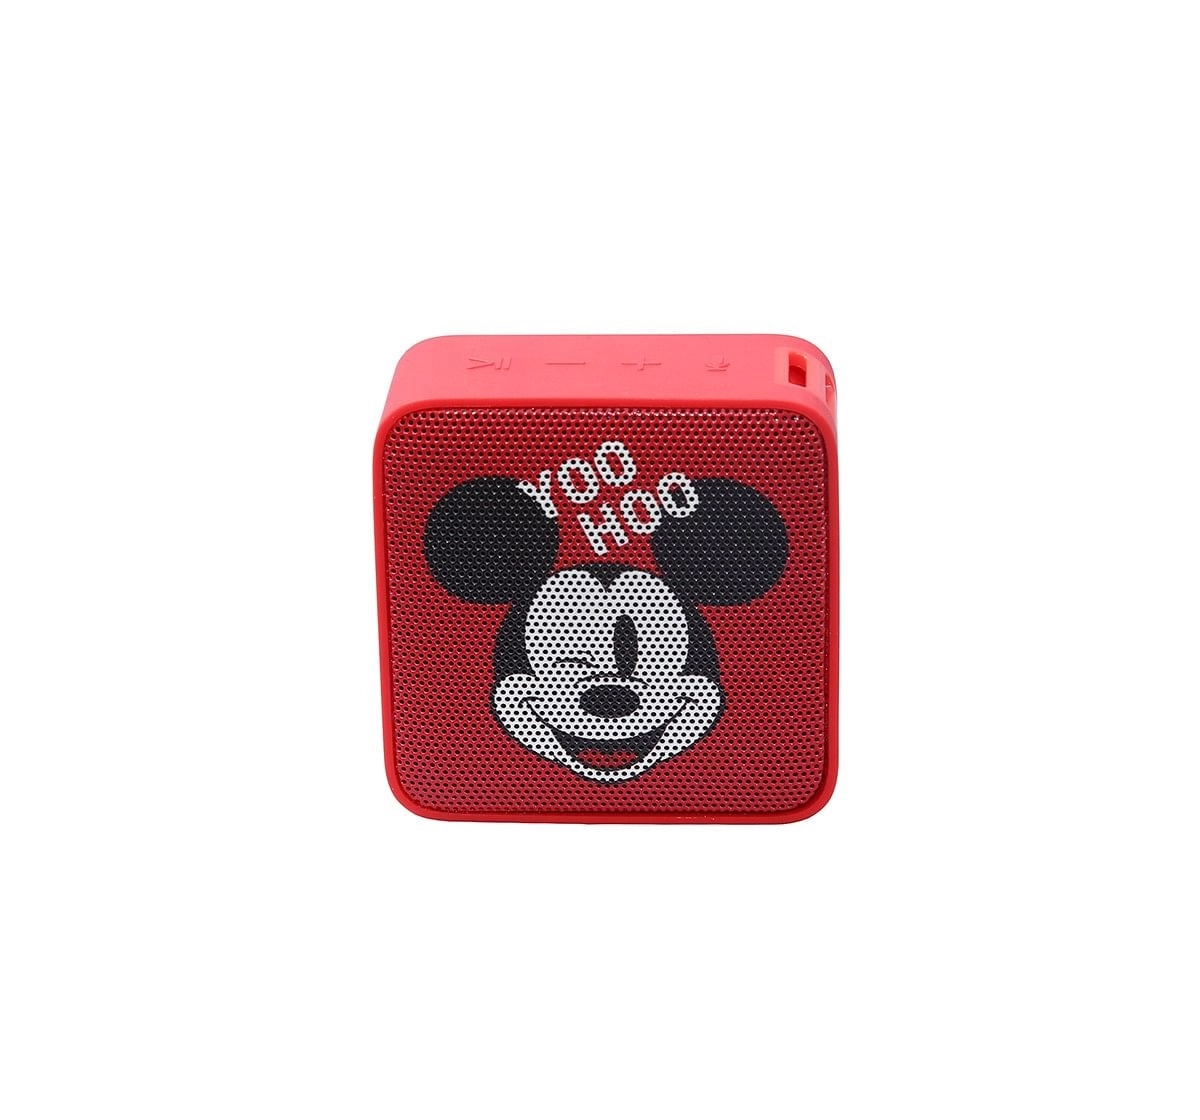 Disney Reconnect WL Speaker 3W DBTM102 MY Red Electronics Accessories for Kids age 13Y+ 